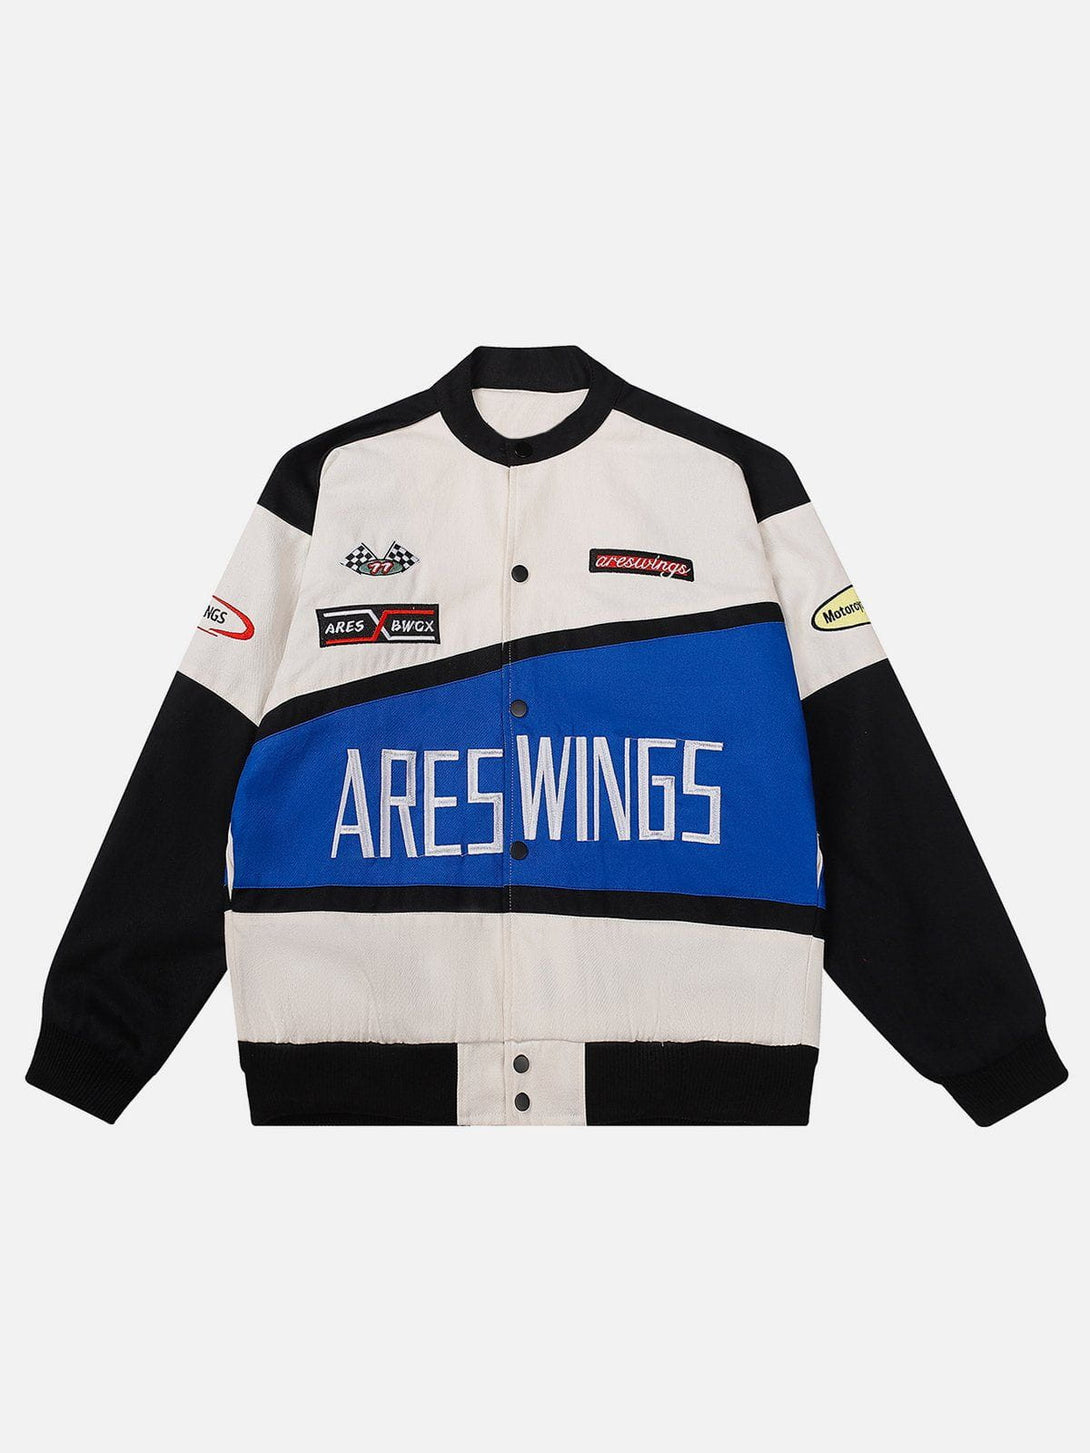 Majesda® - "ARES WINGS" Patchwork Racing Jacket outfit ideas, streetwear fashion - majesda.com